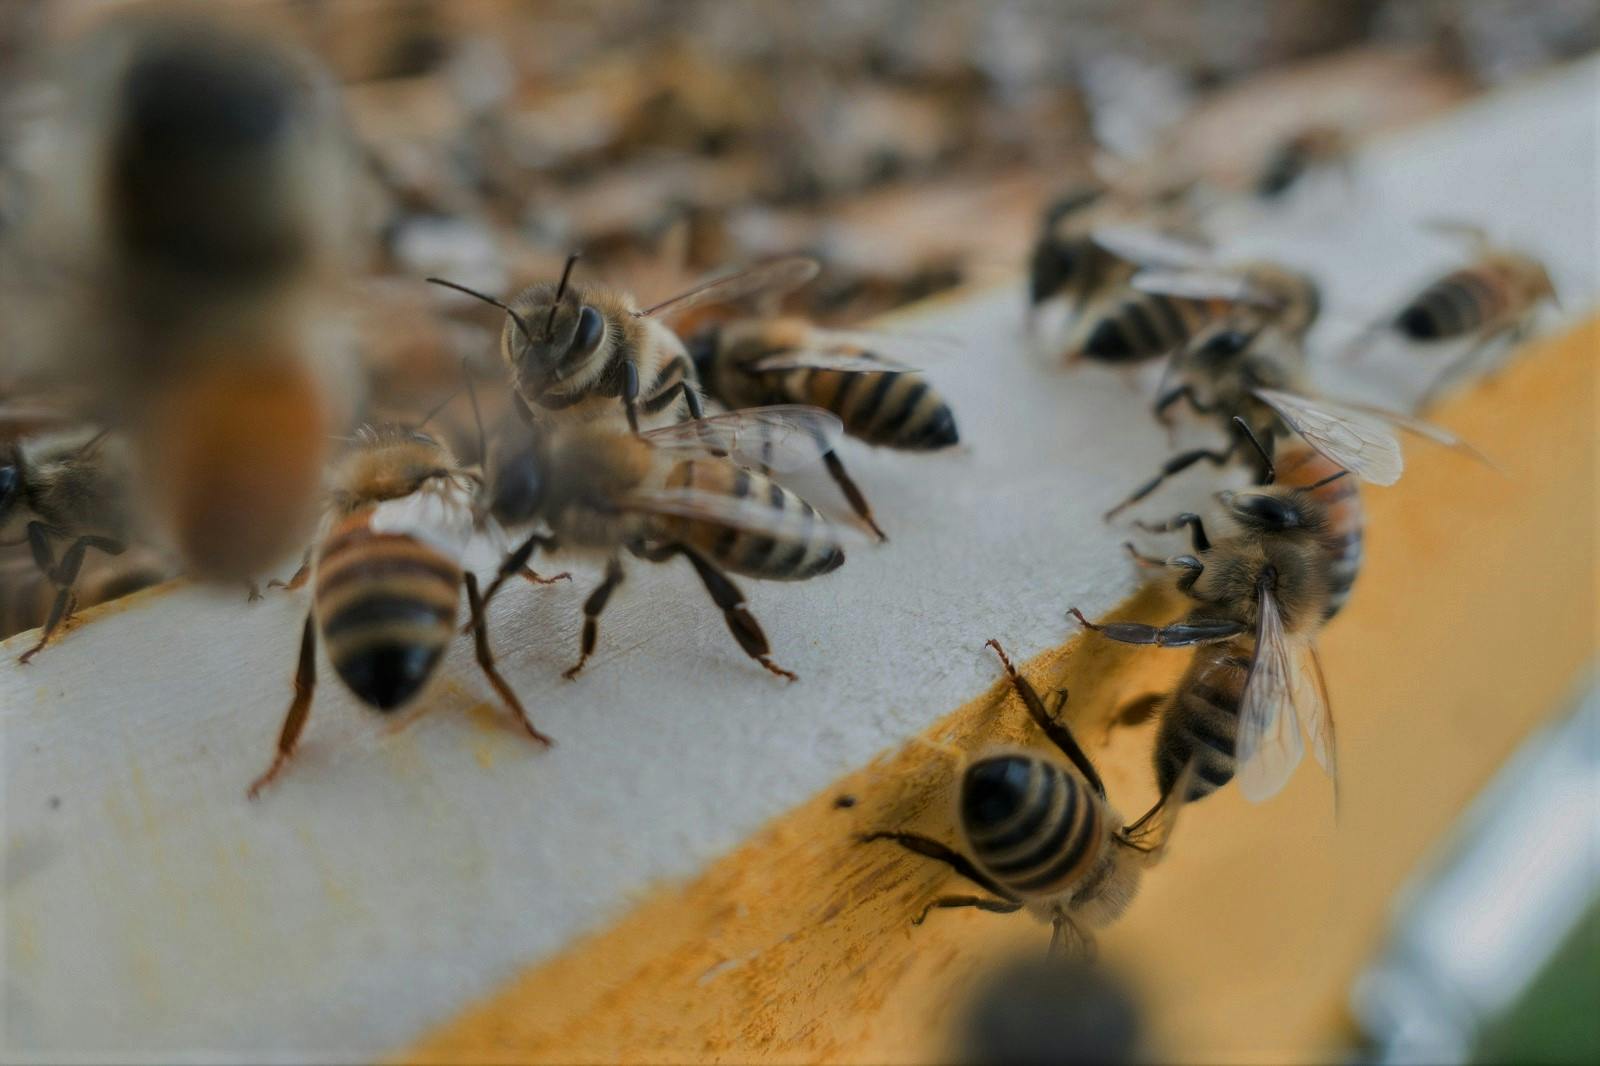 A close up photograph of honey bees returning to their hive.